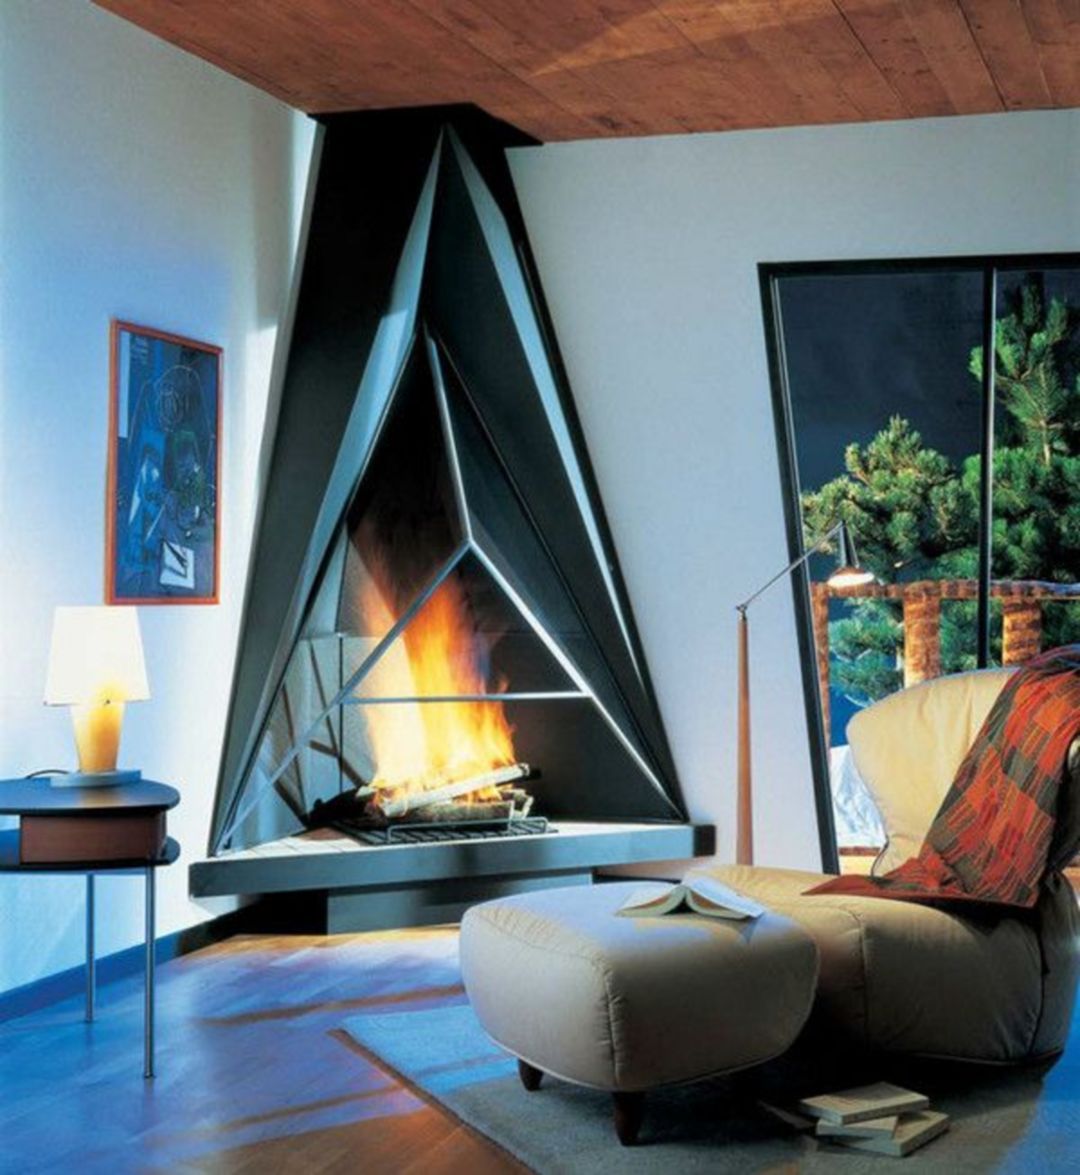 Fireplace Hood Inspirational 12 Modern Fireplace Designs that Make the Room atmosphere